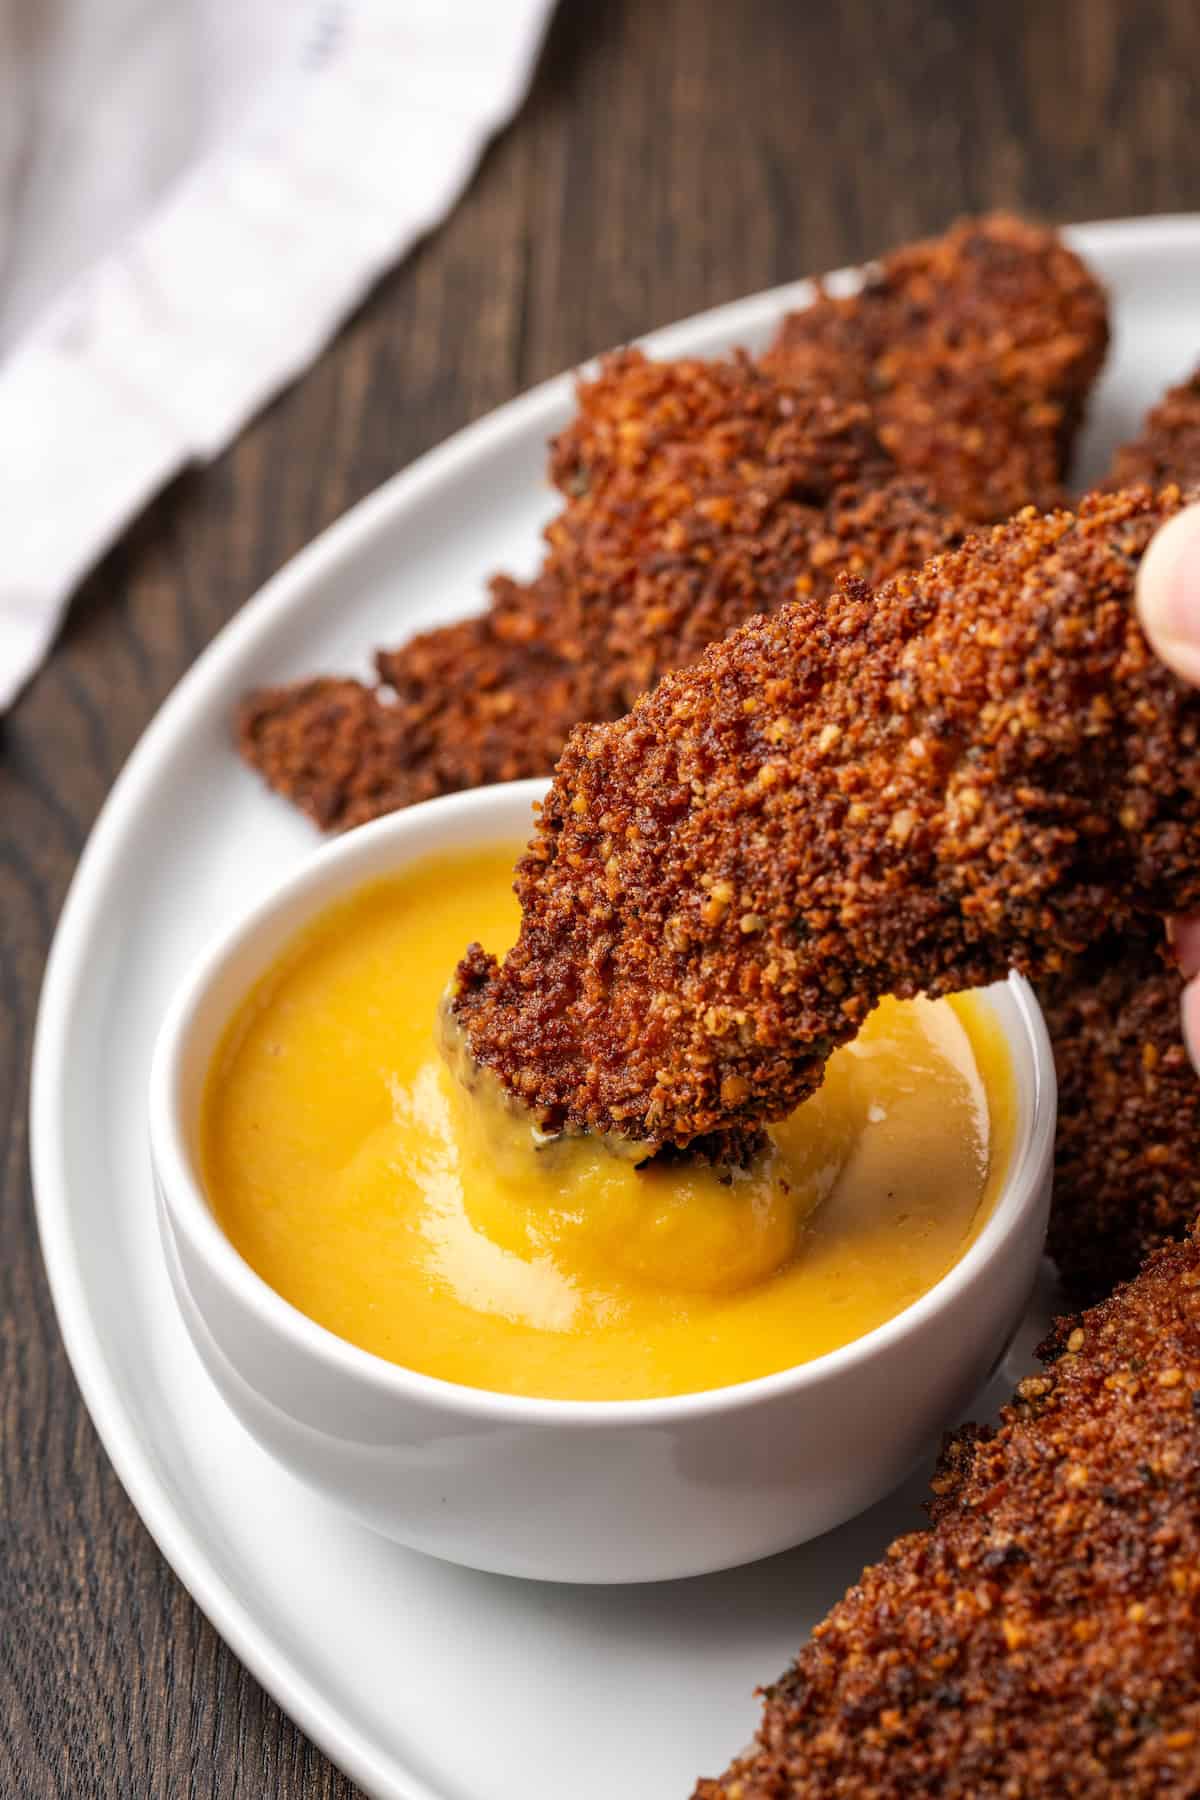 A hand dipping a pecan crusted chicken tender into a small bowl of dipping sauce, next to more chicken tenders on a plate.